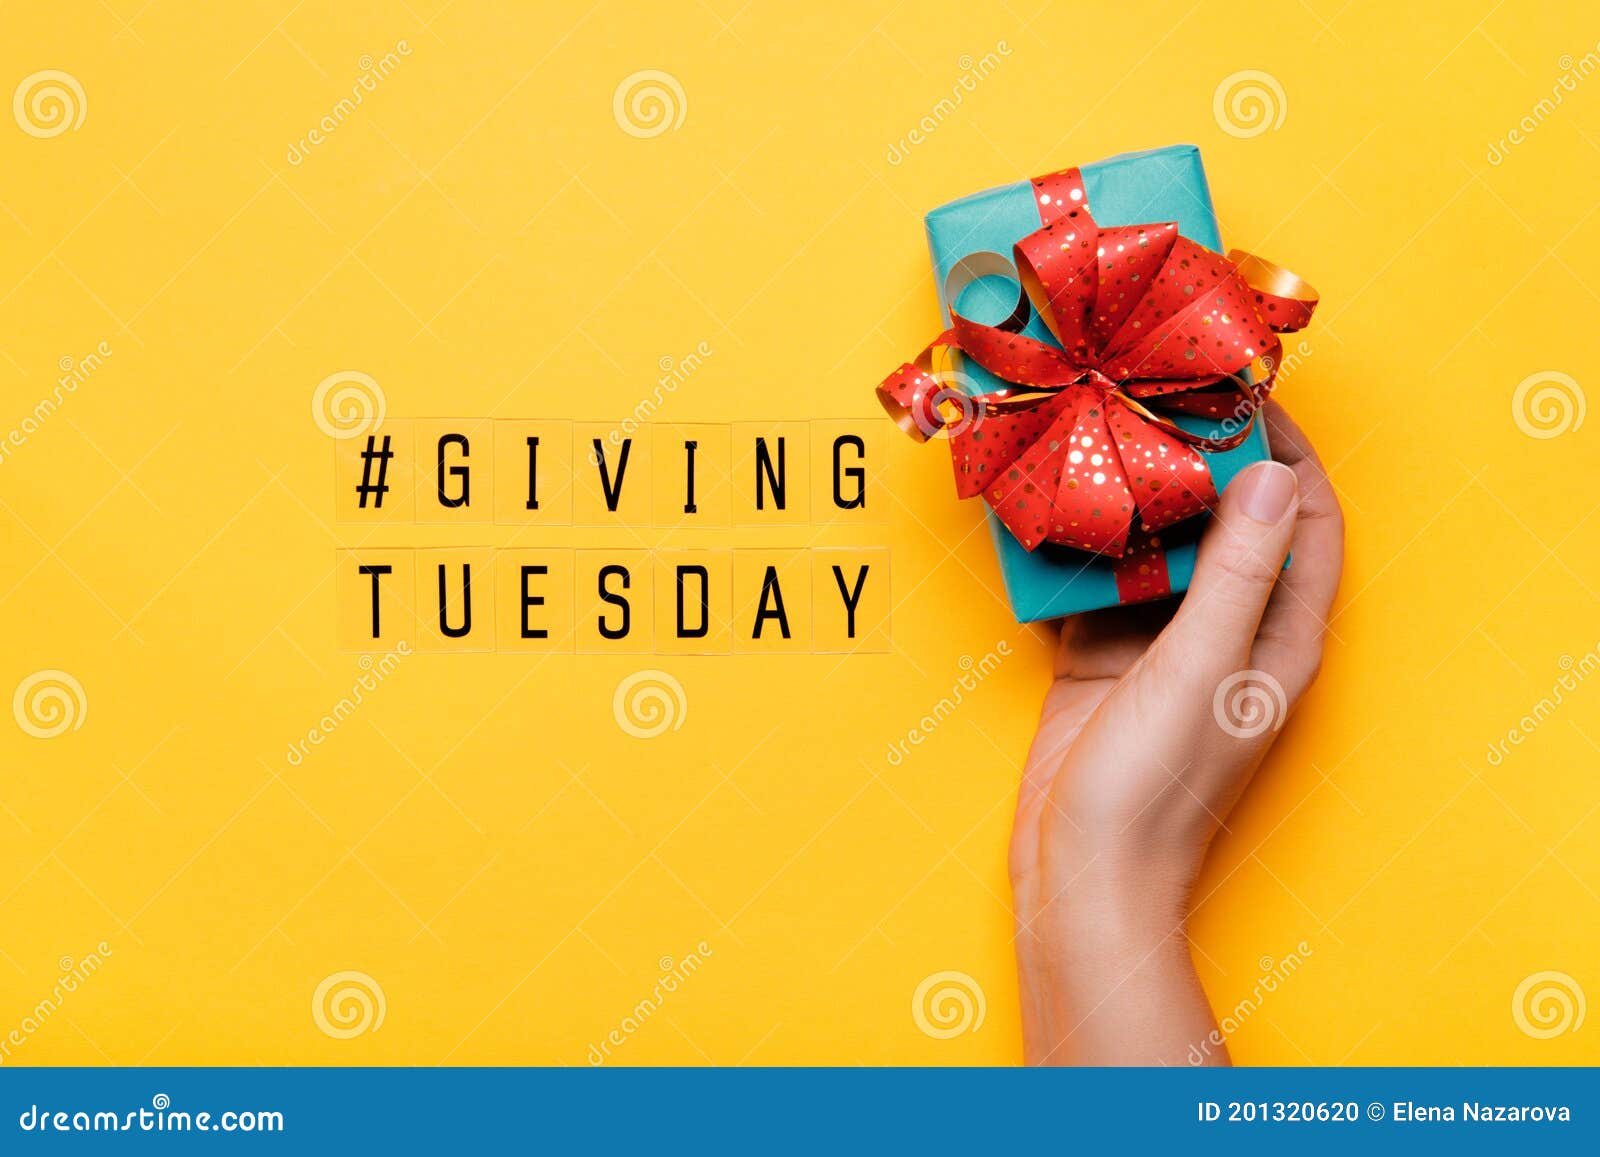 giving tuesday. global day of charitable giving after black friday shopping day. woman hand holding gift box on yellow background